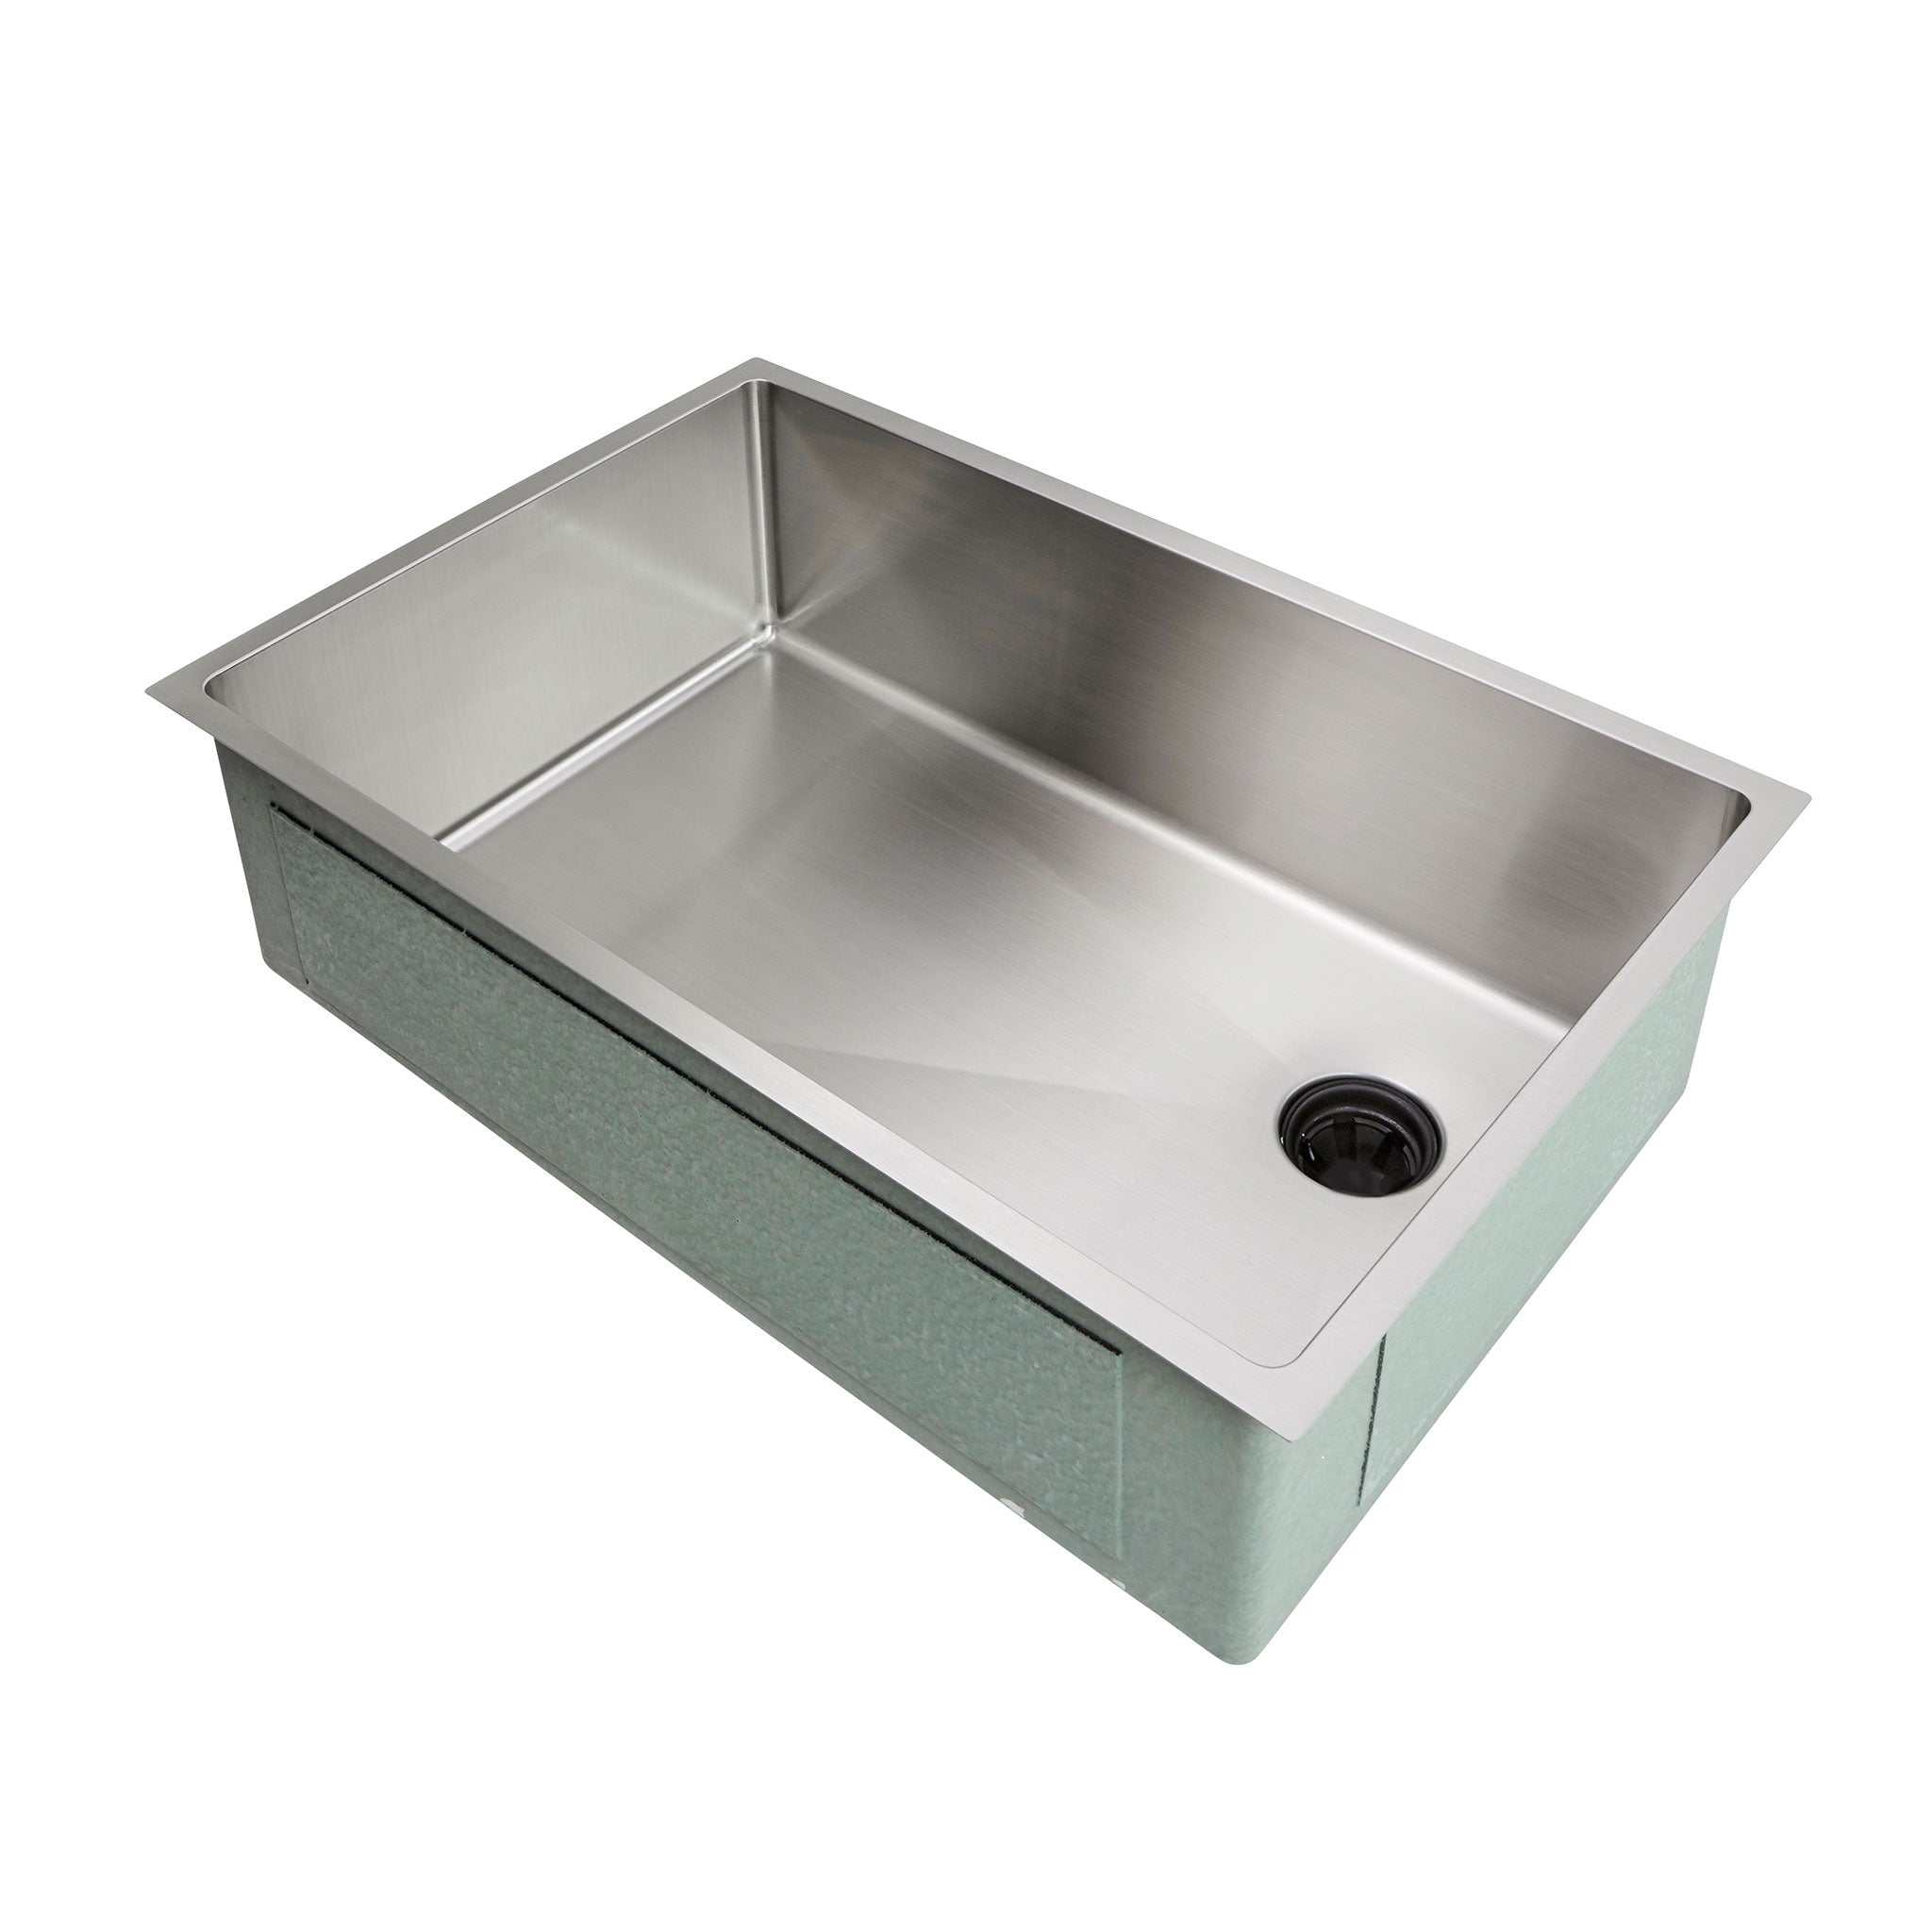 28 inch, single-basin, 16-gauge, stainless-steel undermount kitchen sink with an offset, seamless drain to the right.